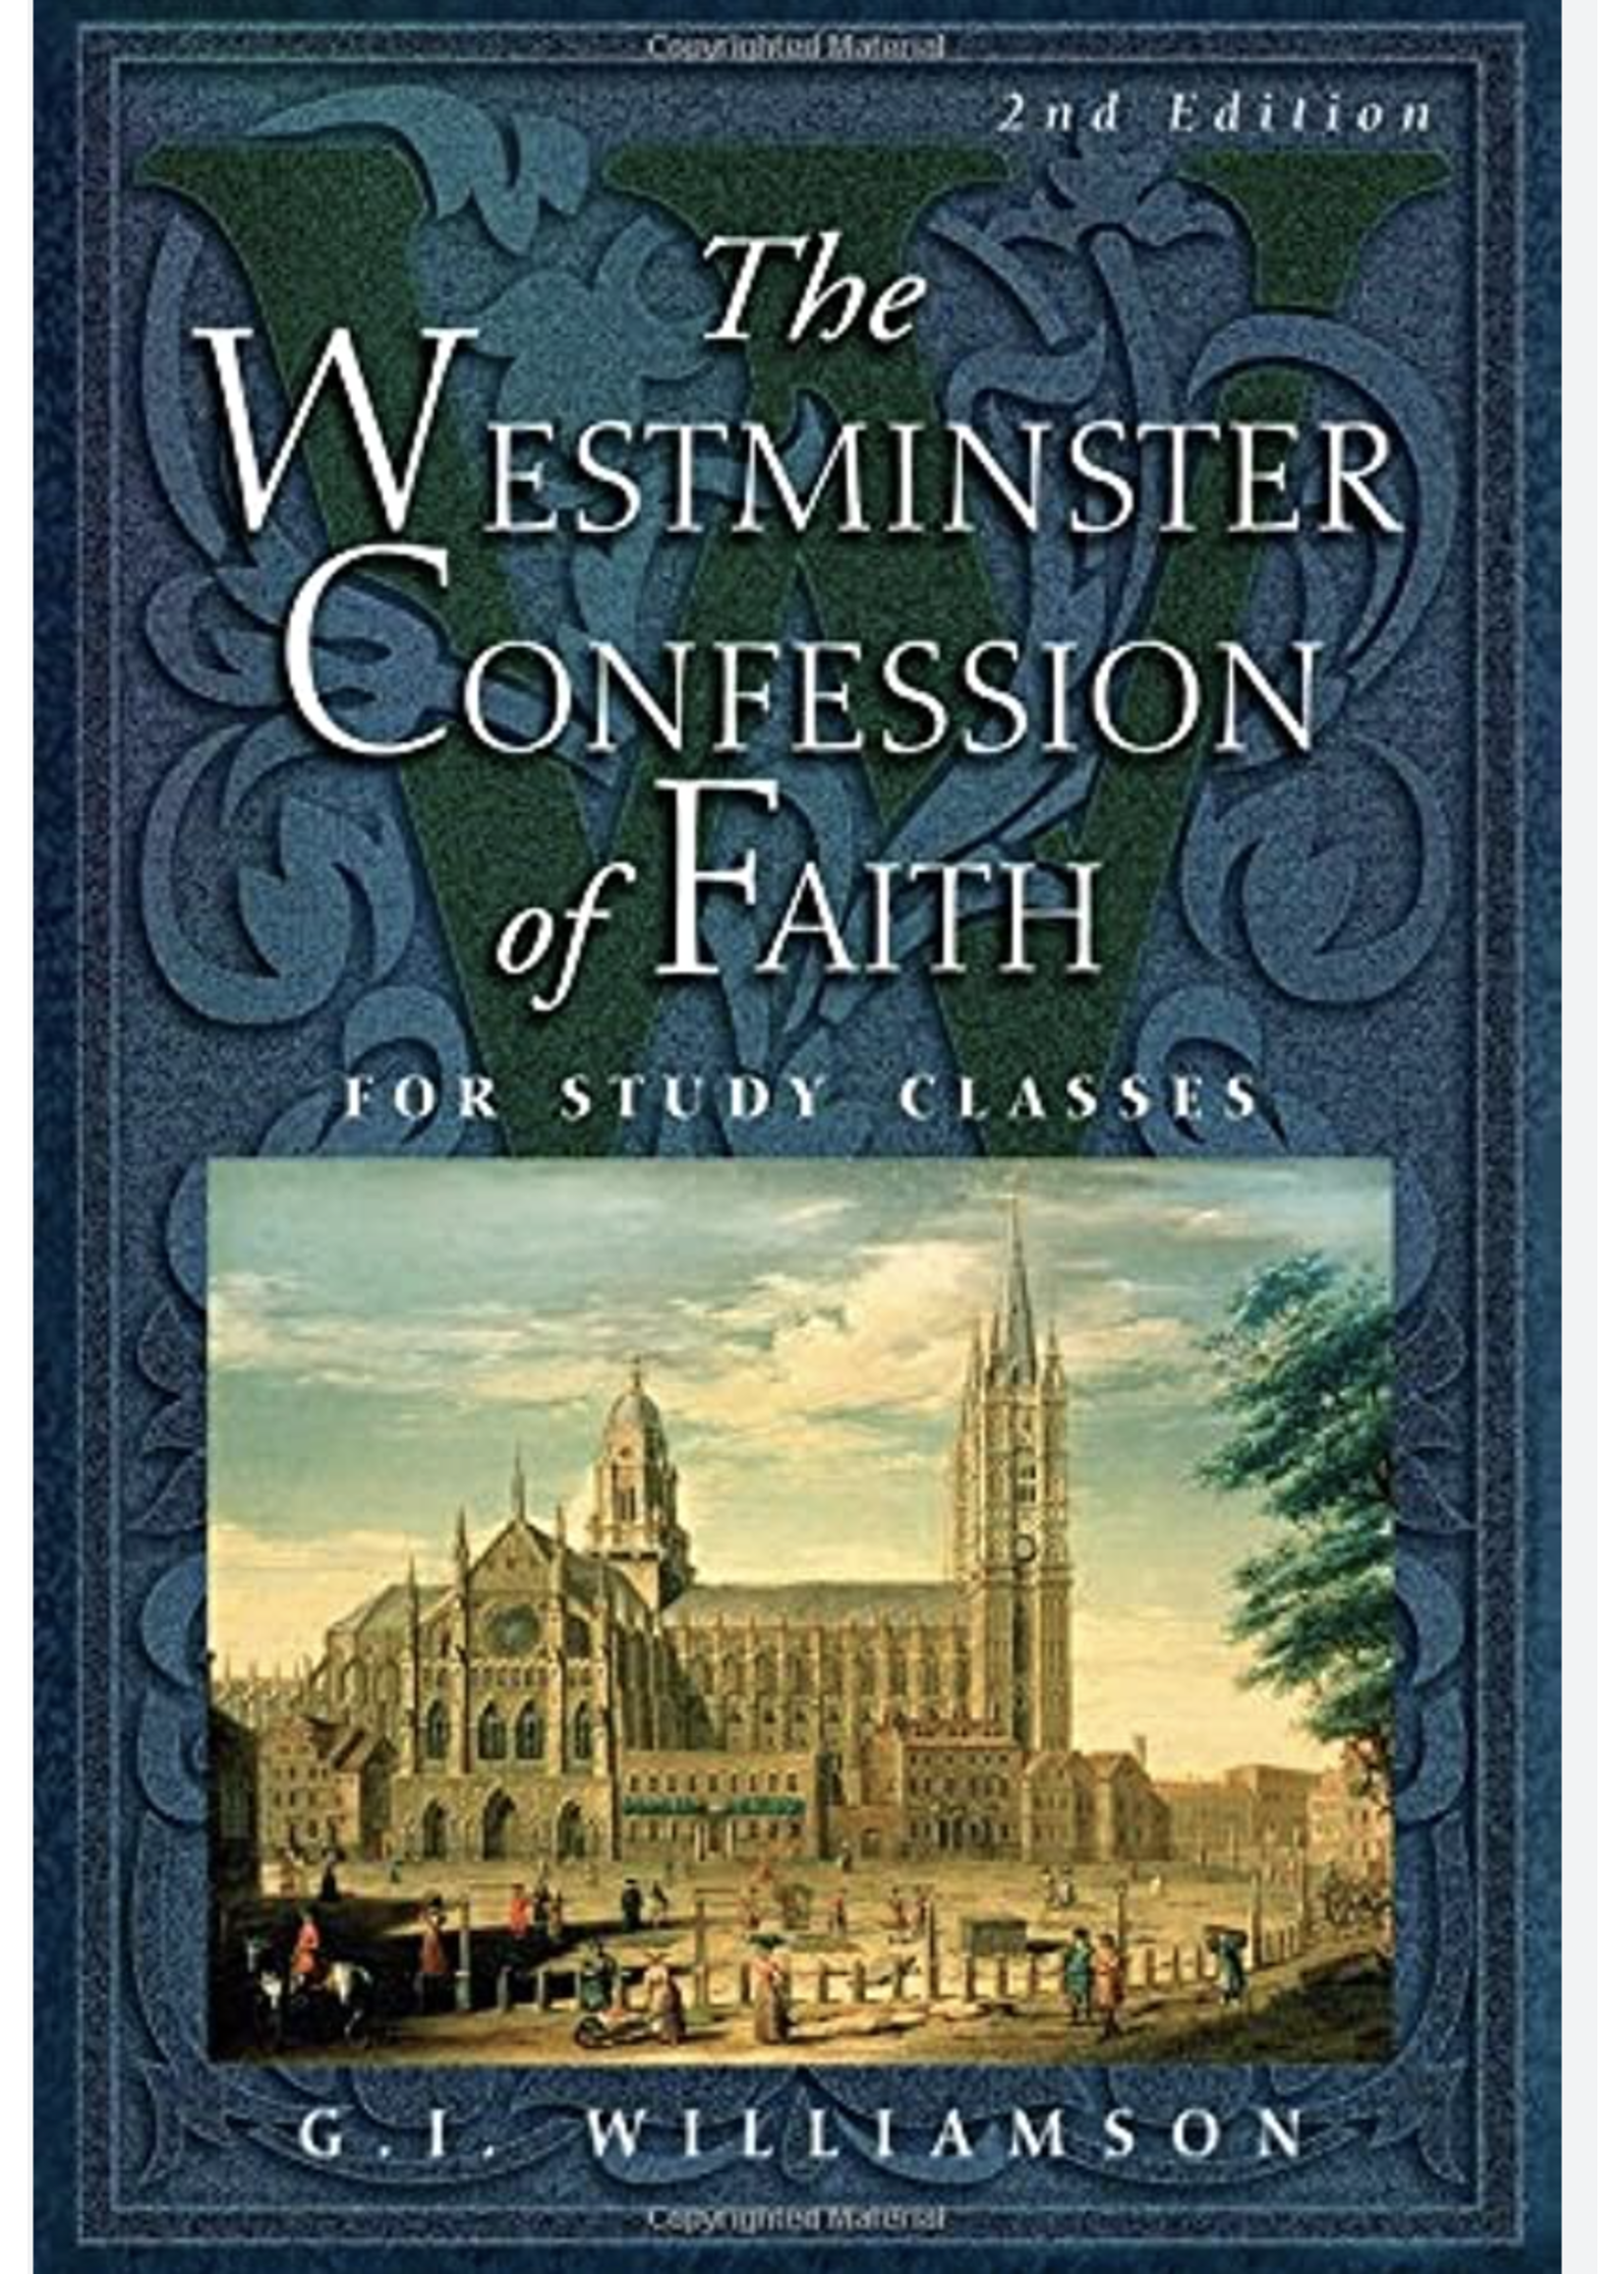 WILLIAMSON, G. I. The Westminster Confession of Faith: For Study Classes (Second Edition) [G.I. Williamson]